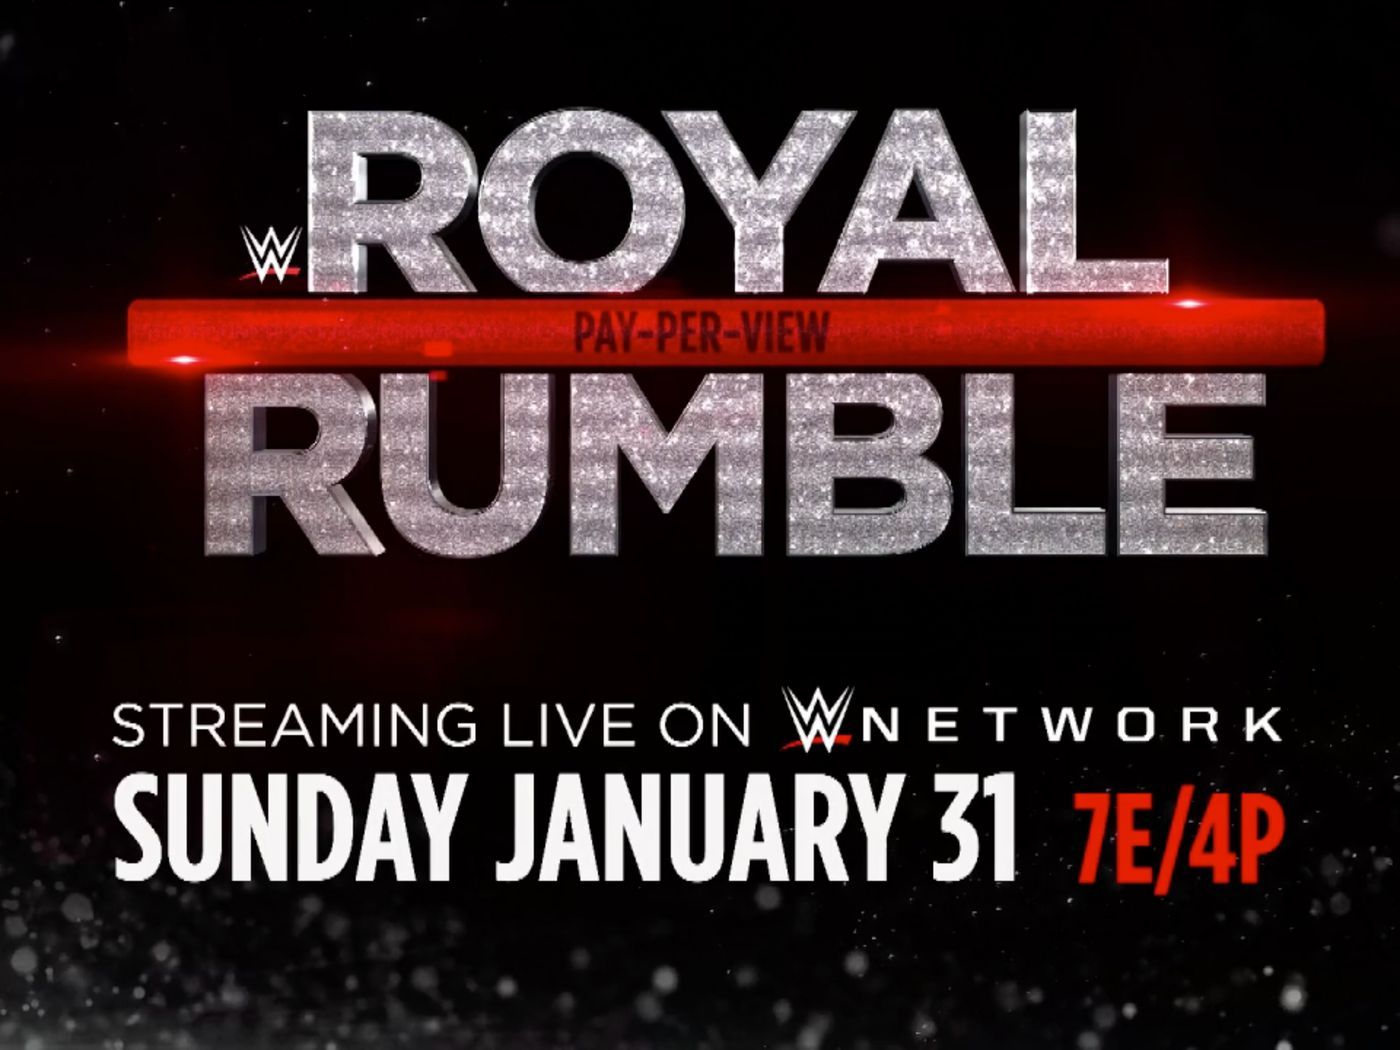 Royal Rumble has a date. will it have fans?